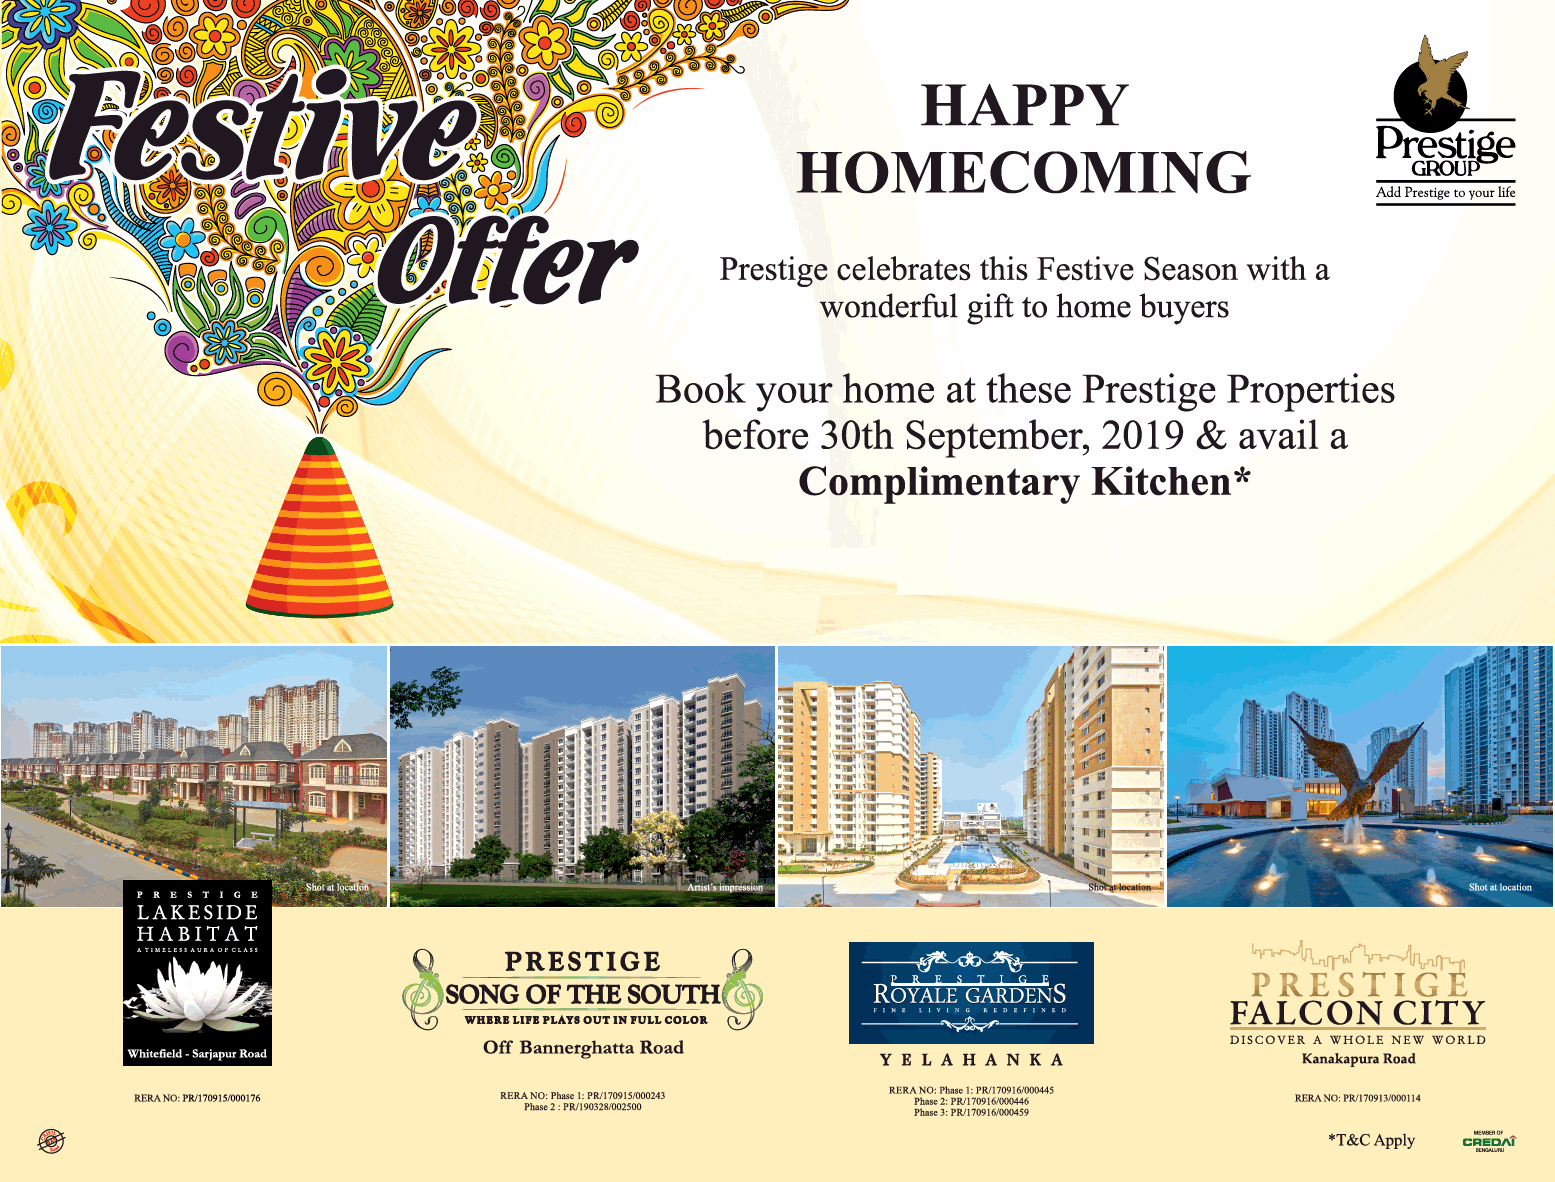 Book your home at these Prestige Properties before 30th September, 2019 & avail a complimentary kitchen, Bangalore